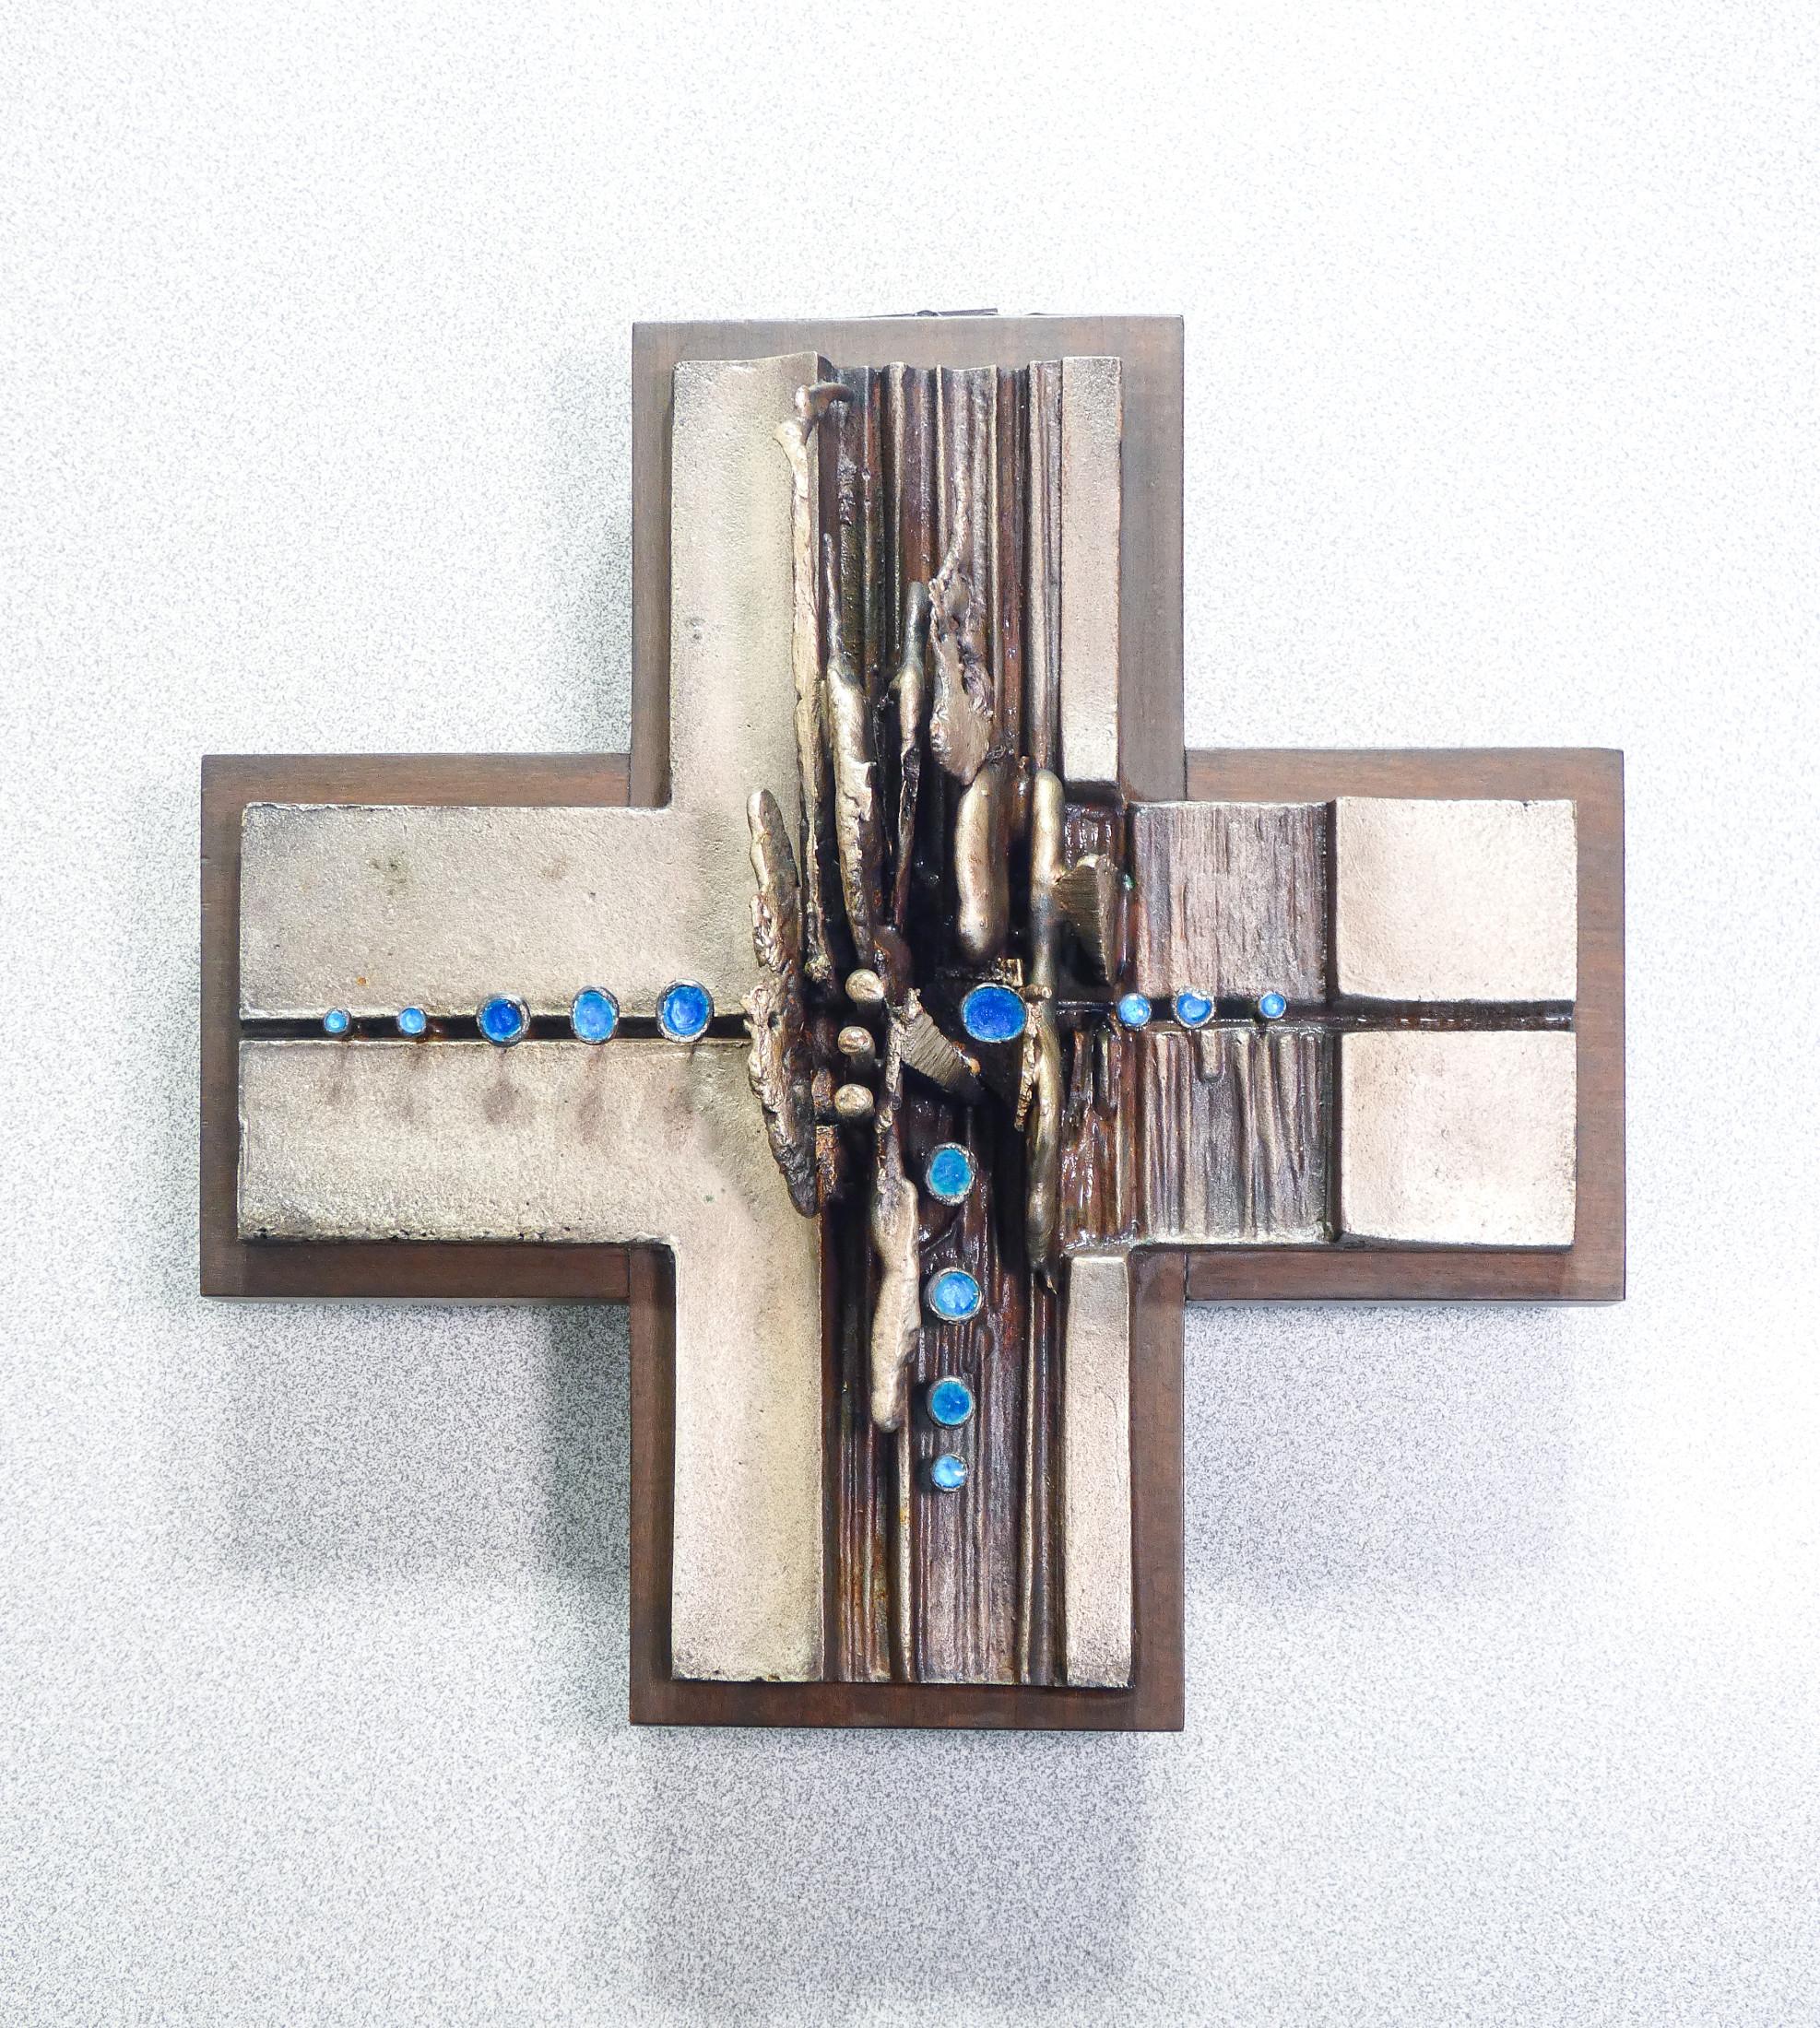 Metal crucifix
and enamels, signed
OF THE FIELD.
Turin, 1960s

ORIGIN
Turin

PERIOD
Anni 60

MARK
The piece is signed
at the back of Del Campo

MATERIALS
Metal, enamel, wood

DIMENSIONS
25.5 x 25.5 x D 9 cm

CONDITIONS
Perfette. Evaluate through the